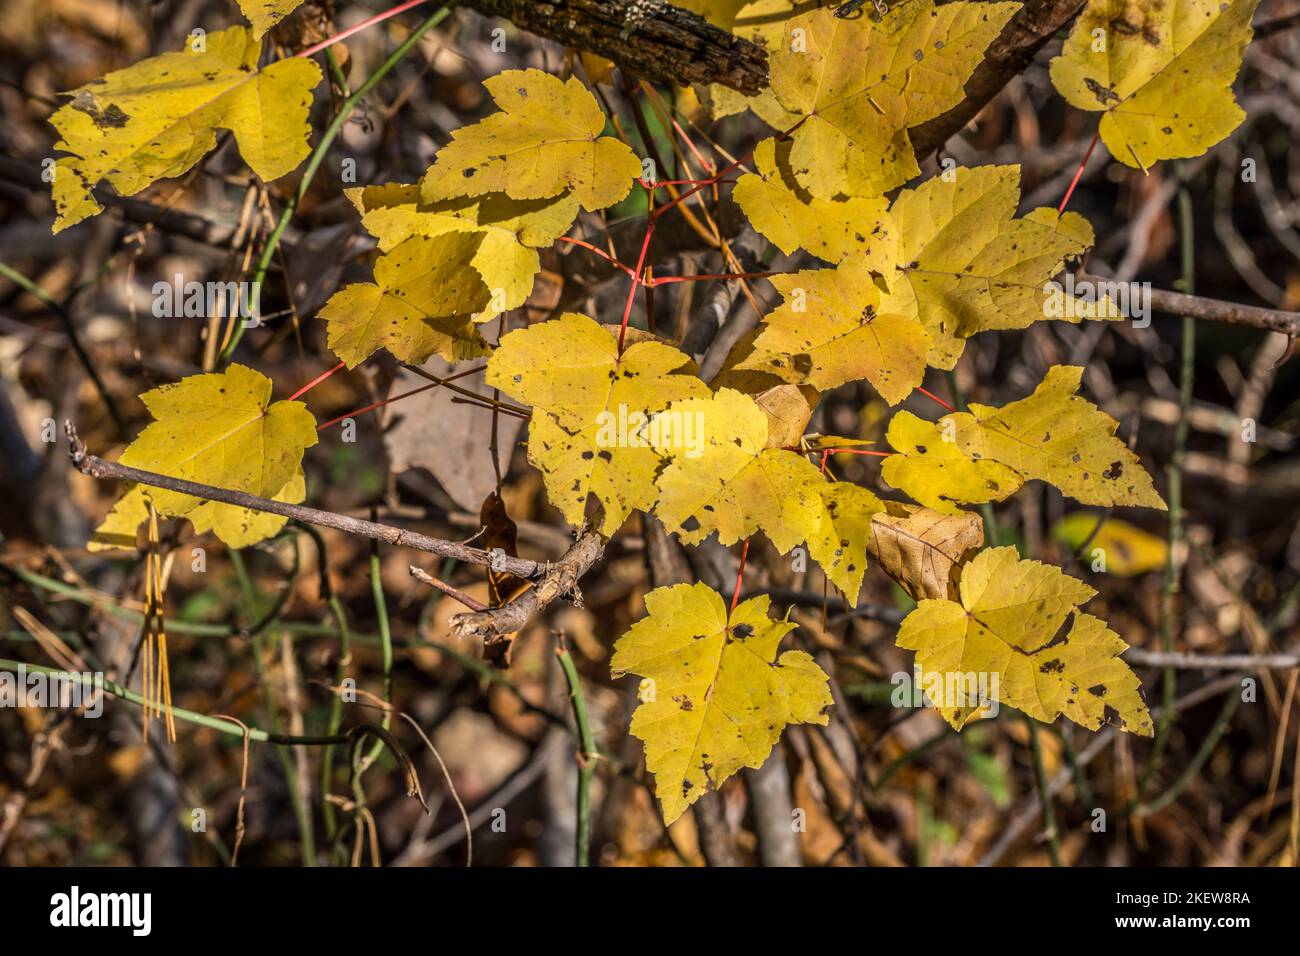 Closeup view of branches full of vibrant yellow leaves on a tree with the sunlight highlighting the autumn foliage Stock Photo